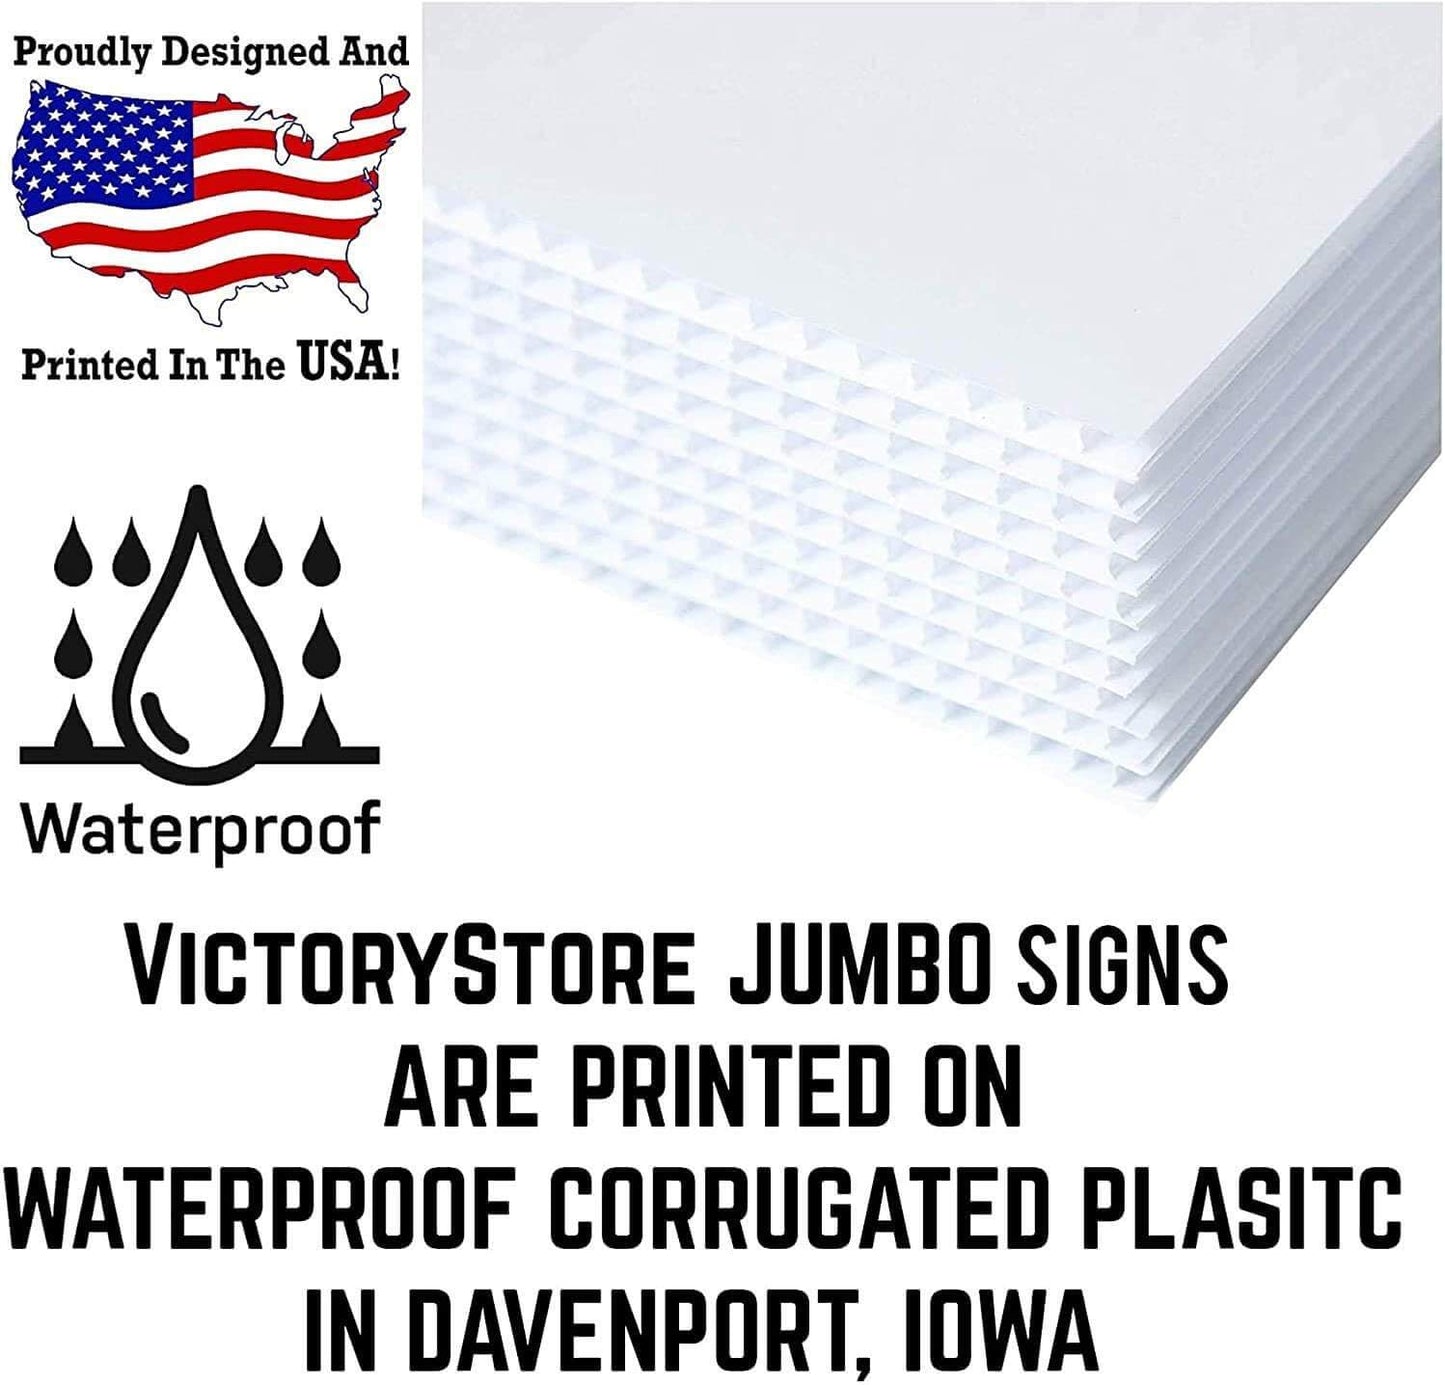 made in the usa waterproof corrugated plastic